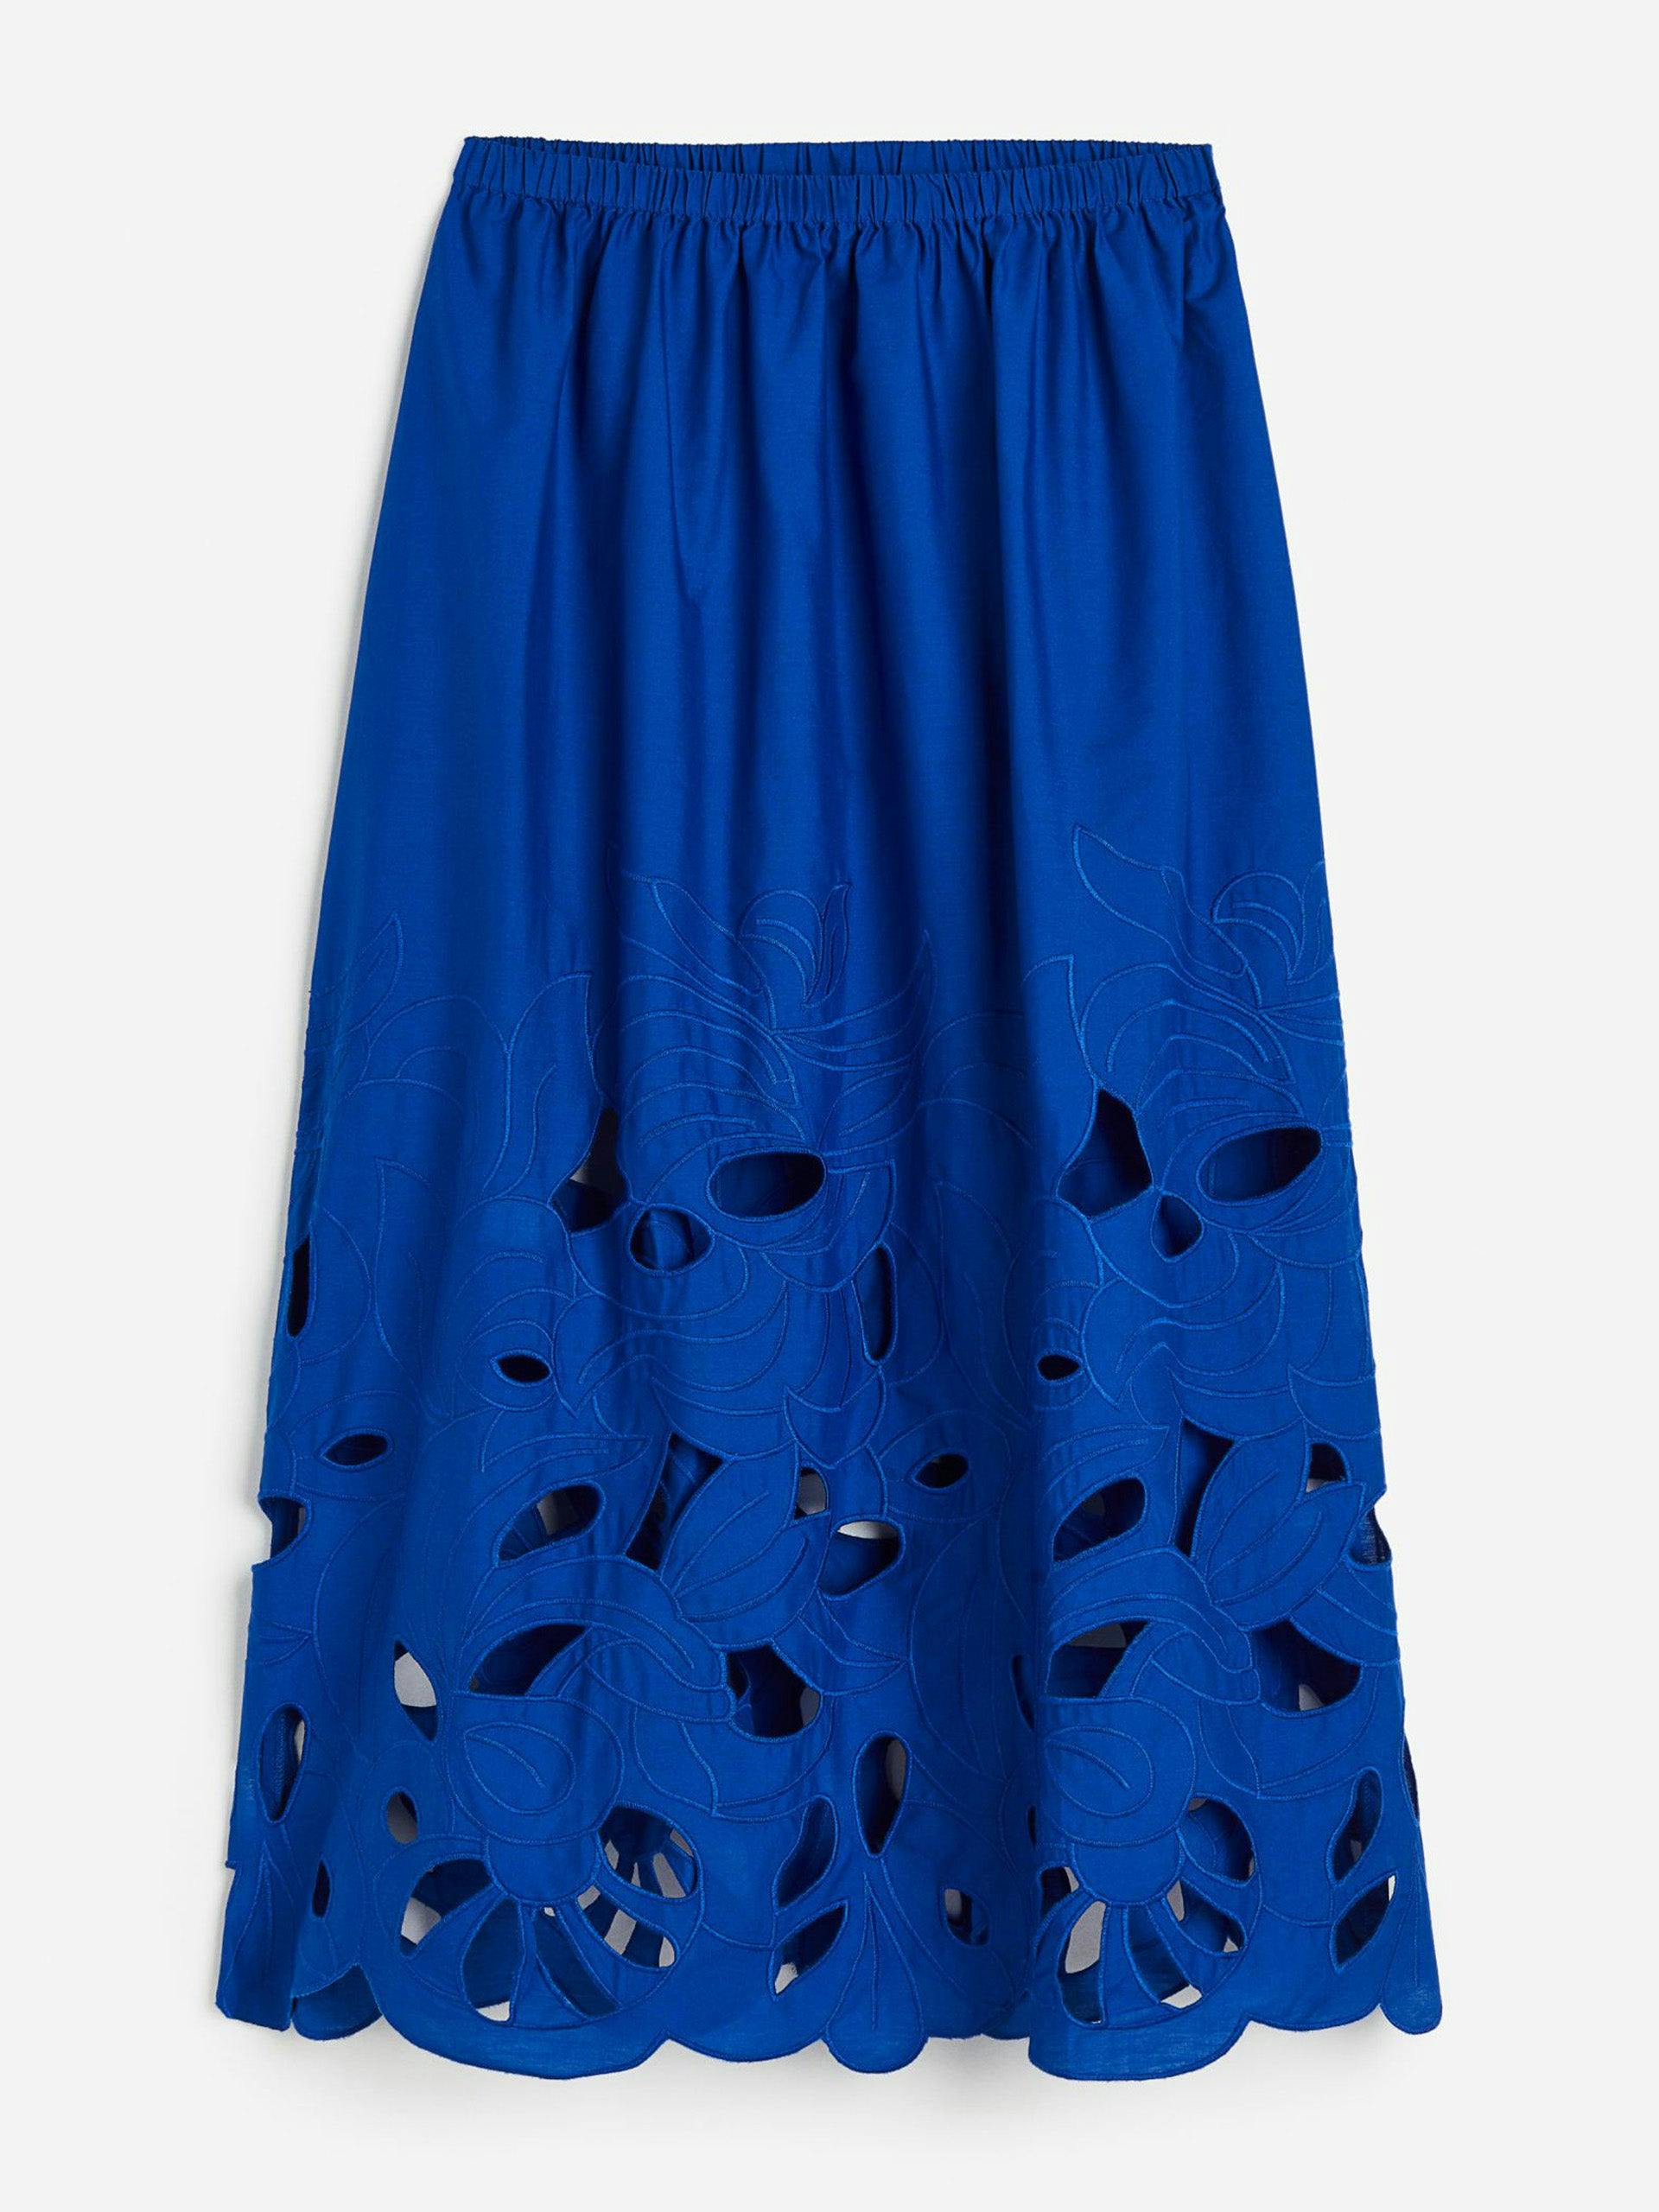 Cutout embroidered skirt